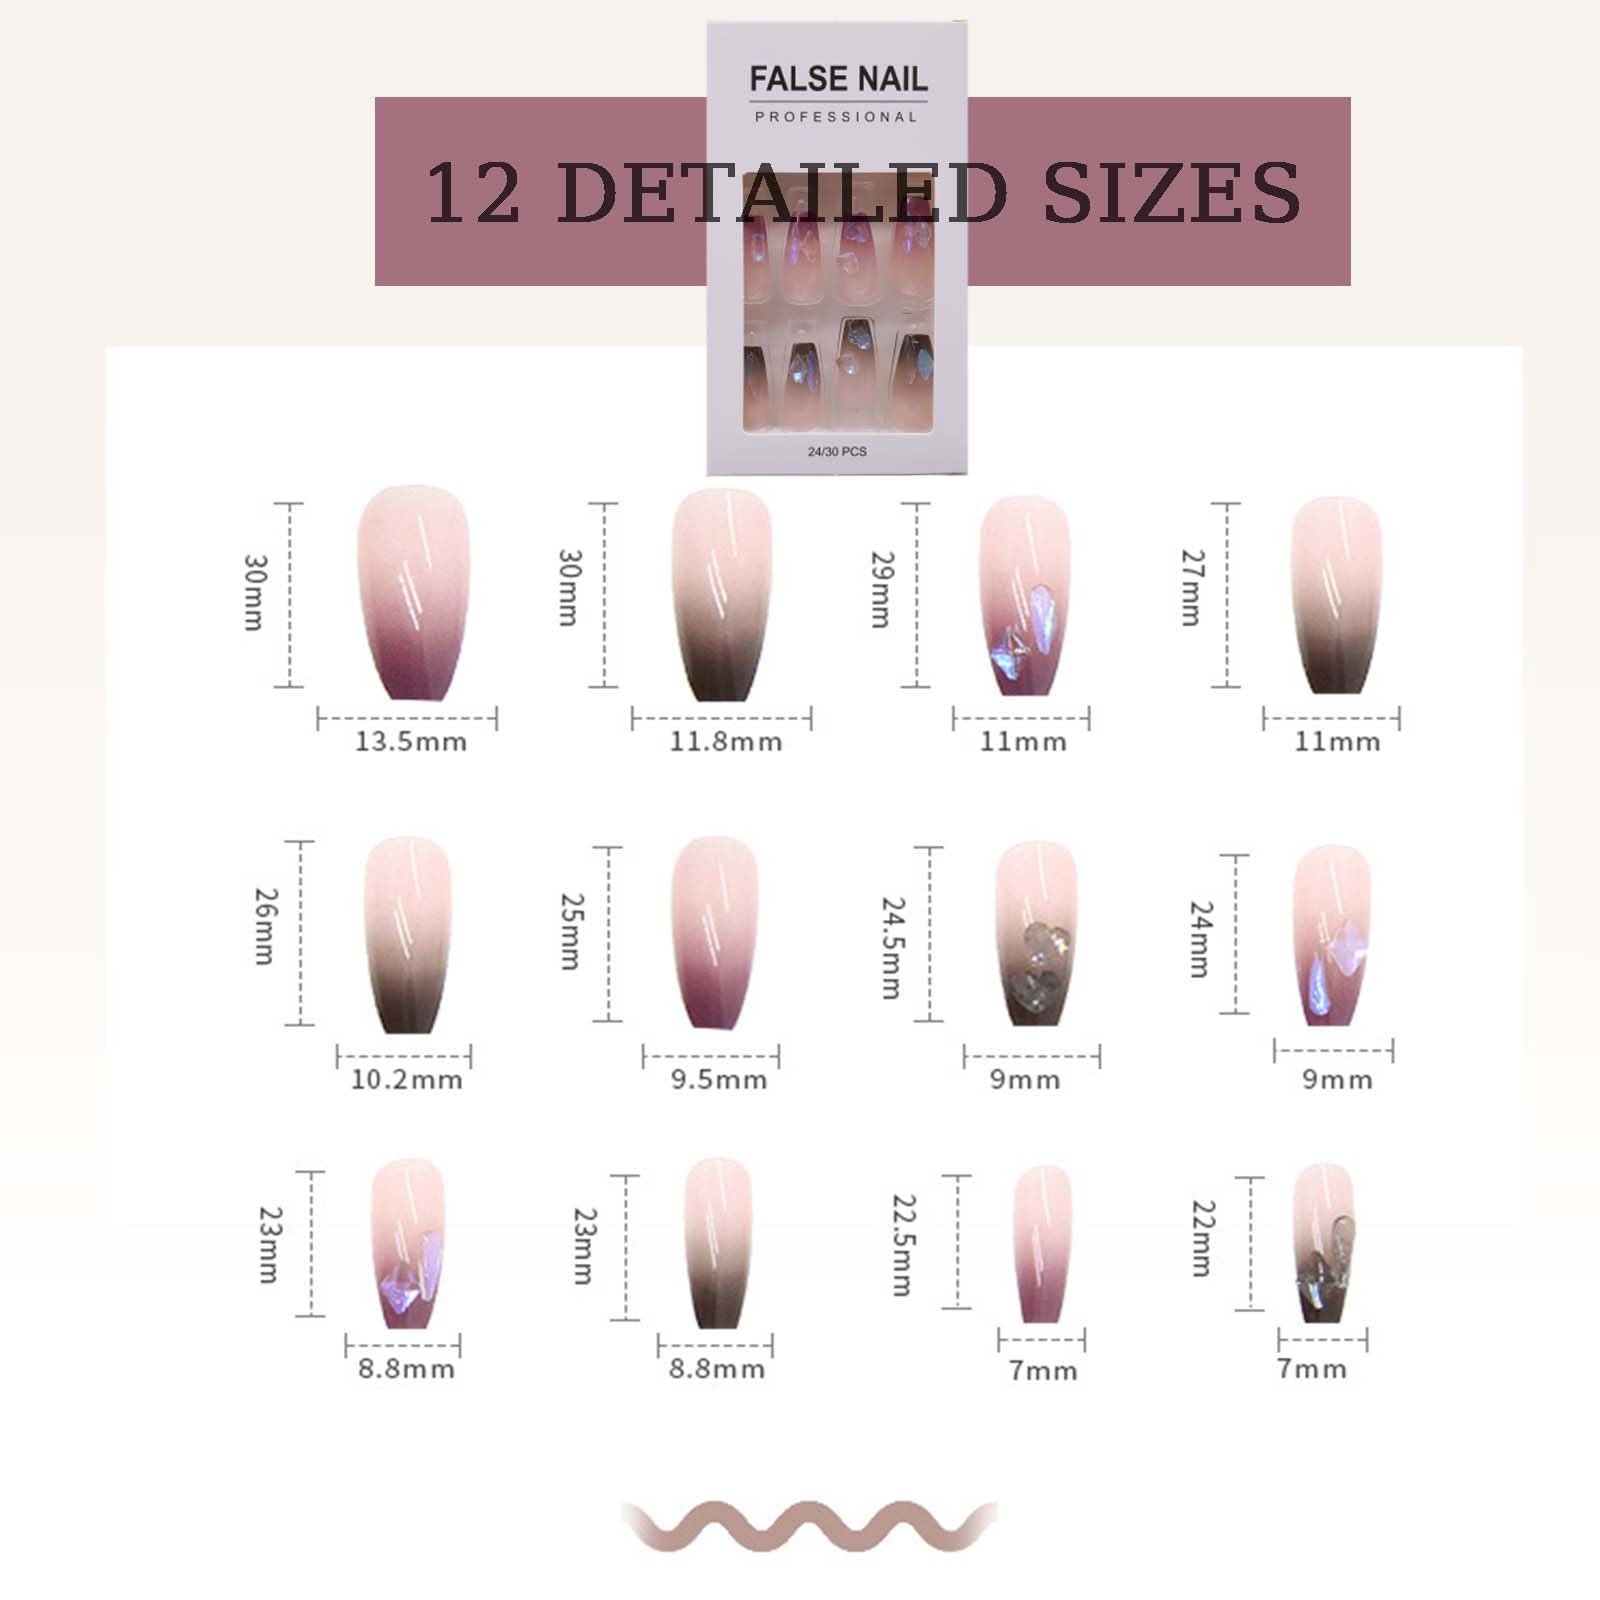 Trendyfave French Tips Long False Nails,24Pcs Ice-clear Black Purple Gradient False Nails,Double Color Matching Glue on Nails in 12 Sizes With Diamond,Stick on Nails for Women -Black Purple Diamond